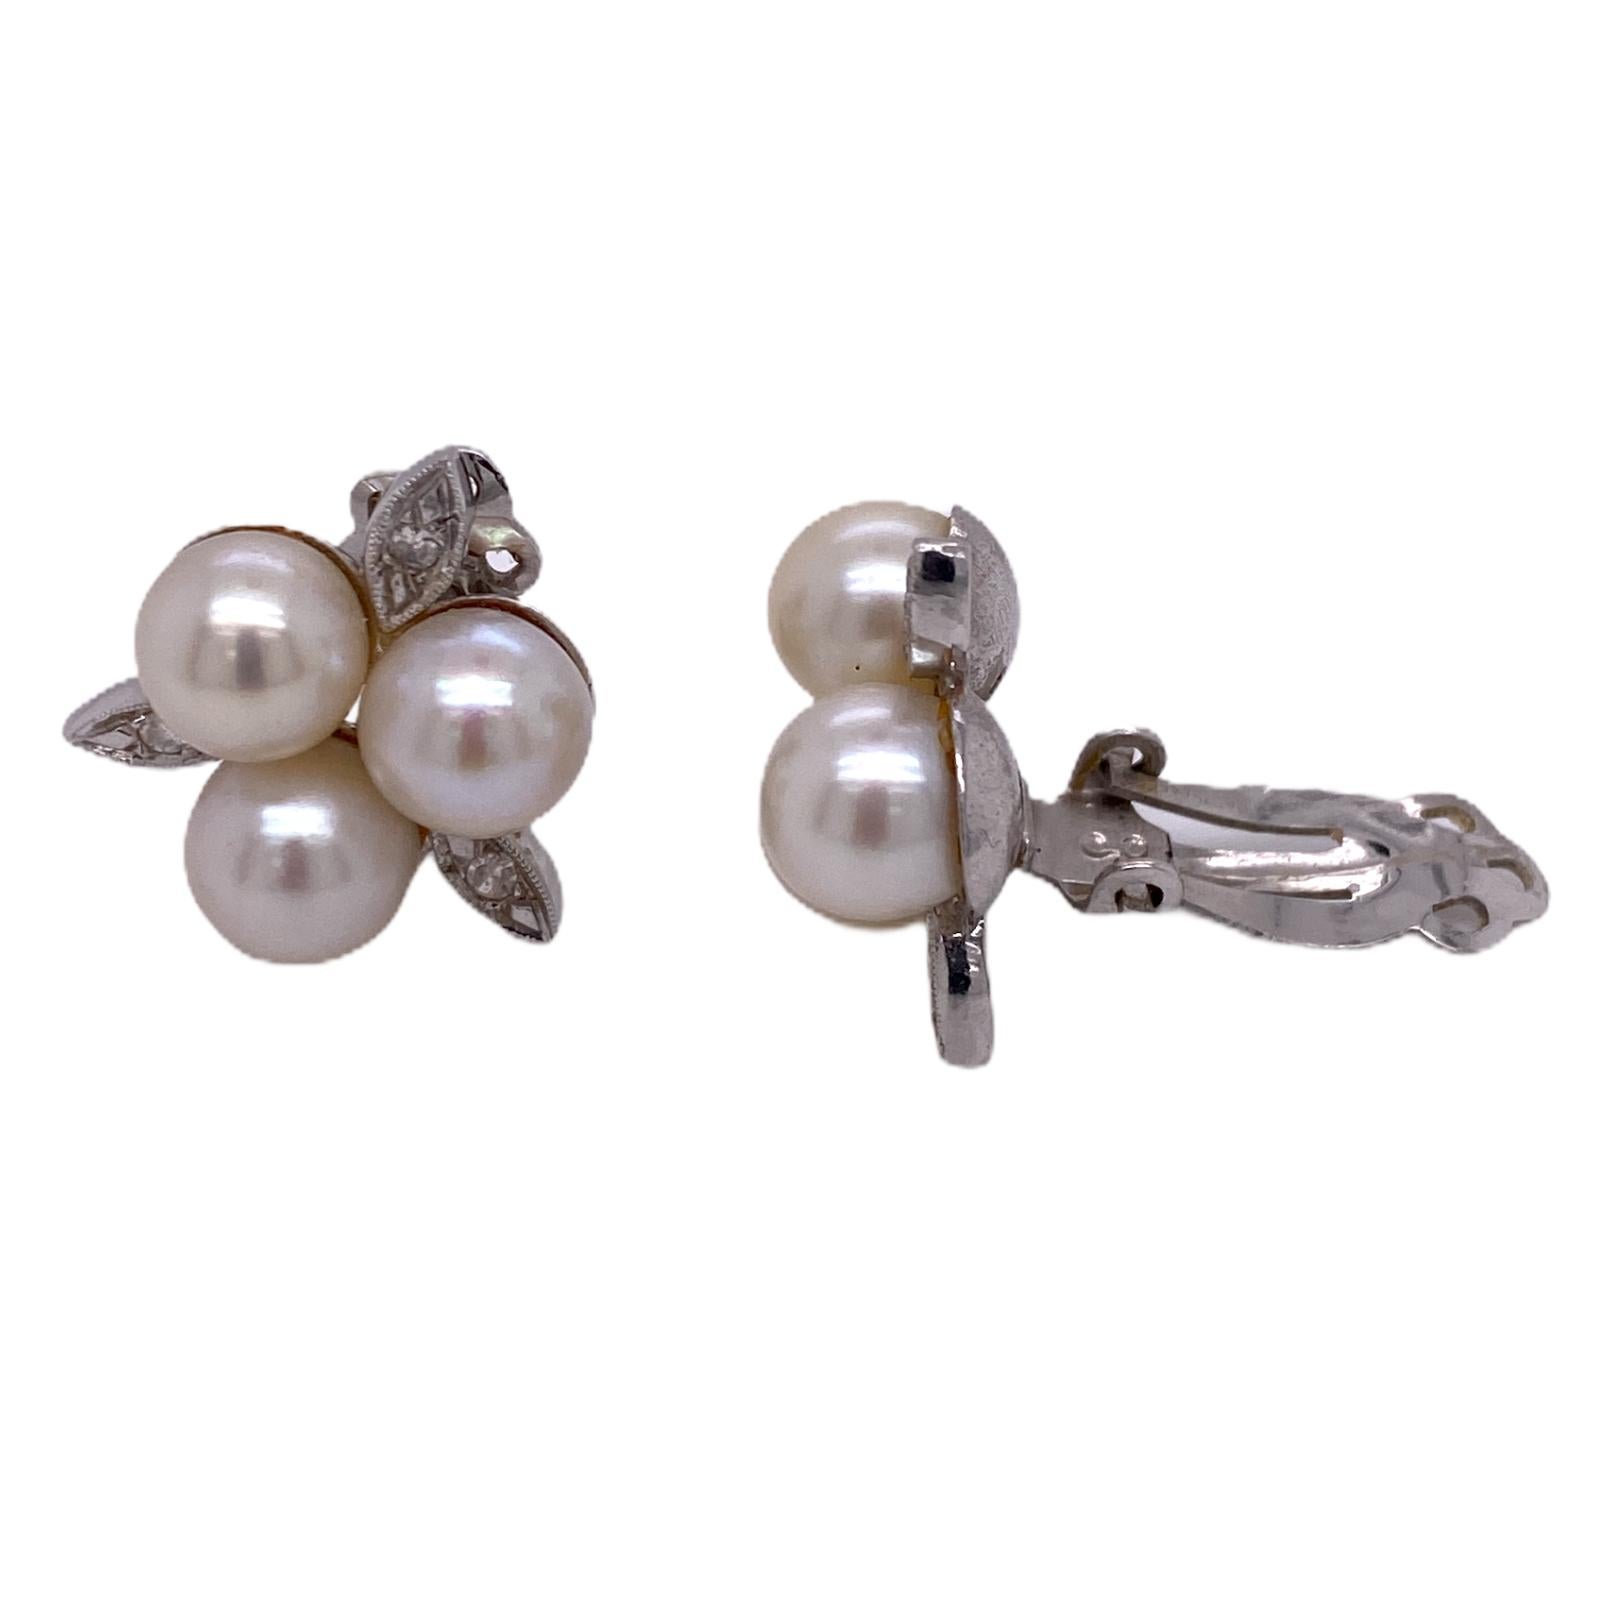 Contemporary Diamond Cultured Pearl White Gold Floral Motif Vintage Estate Ear Clips Earrings